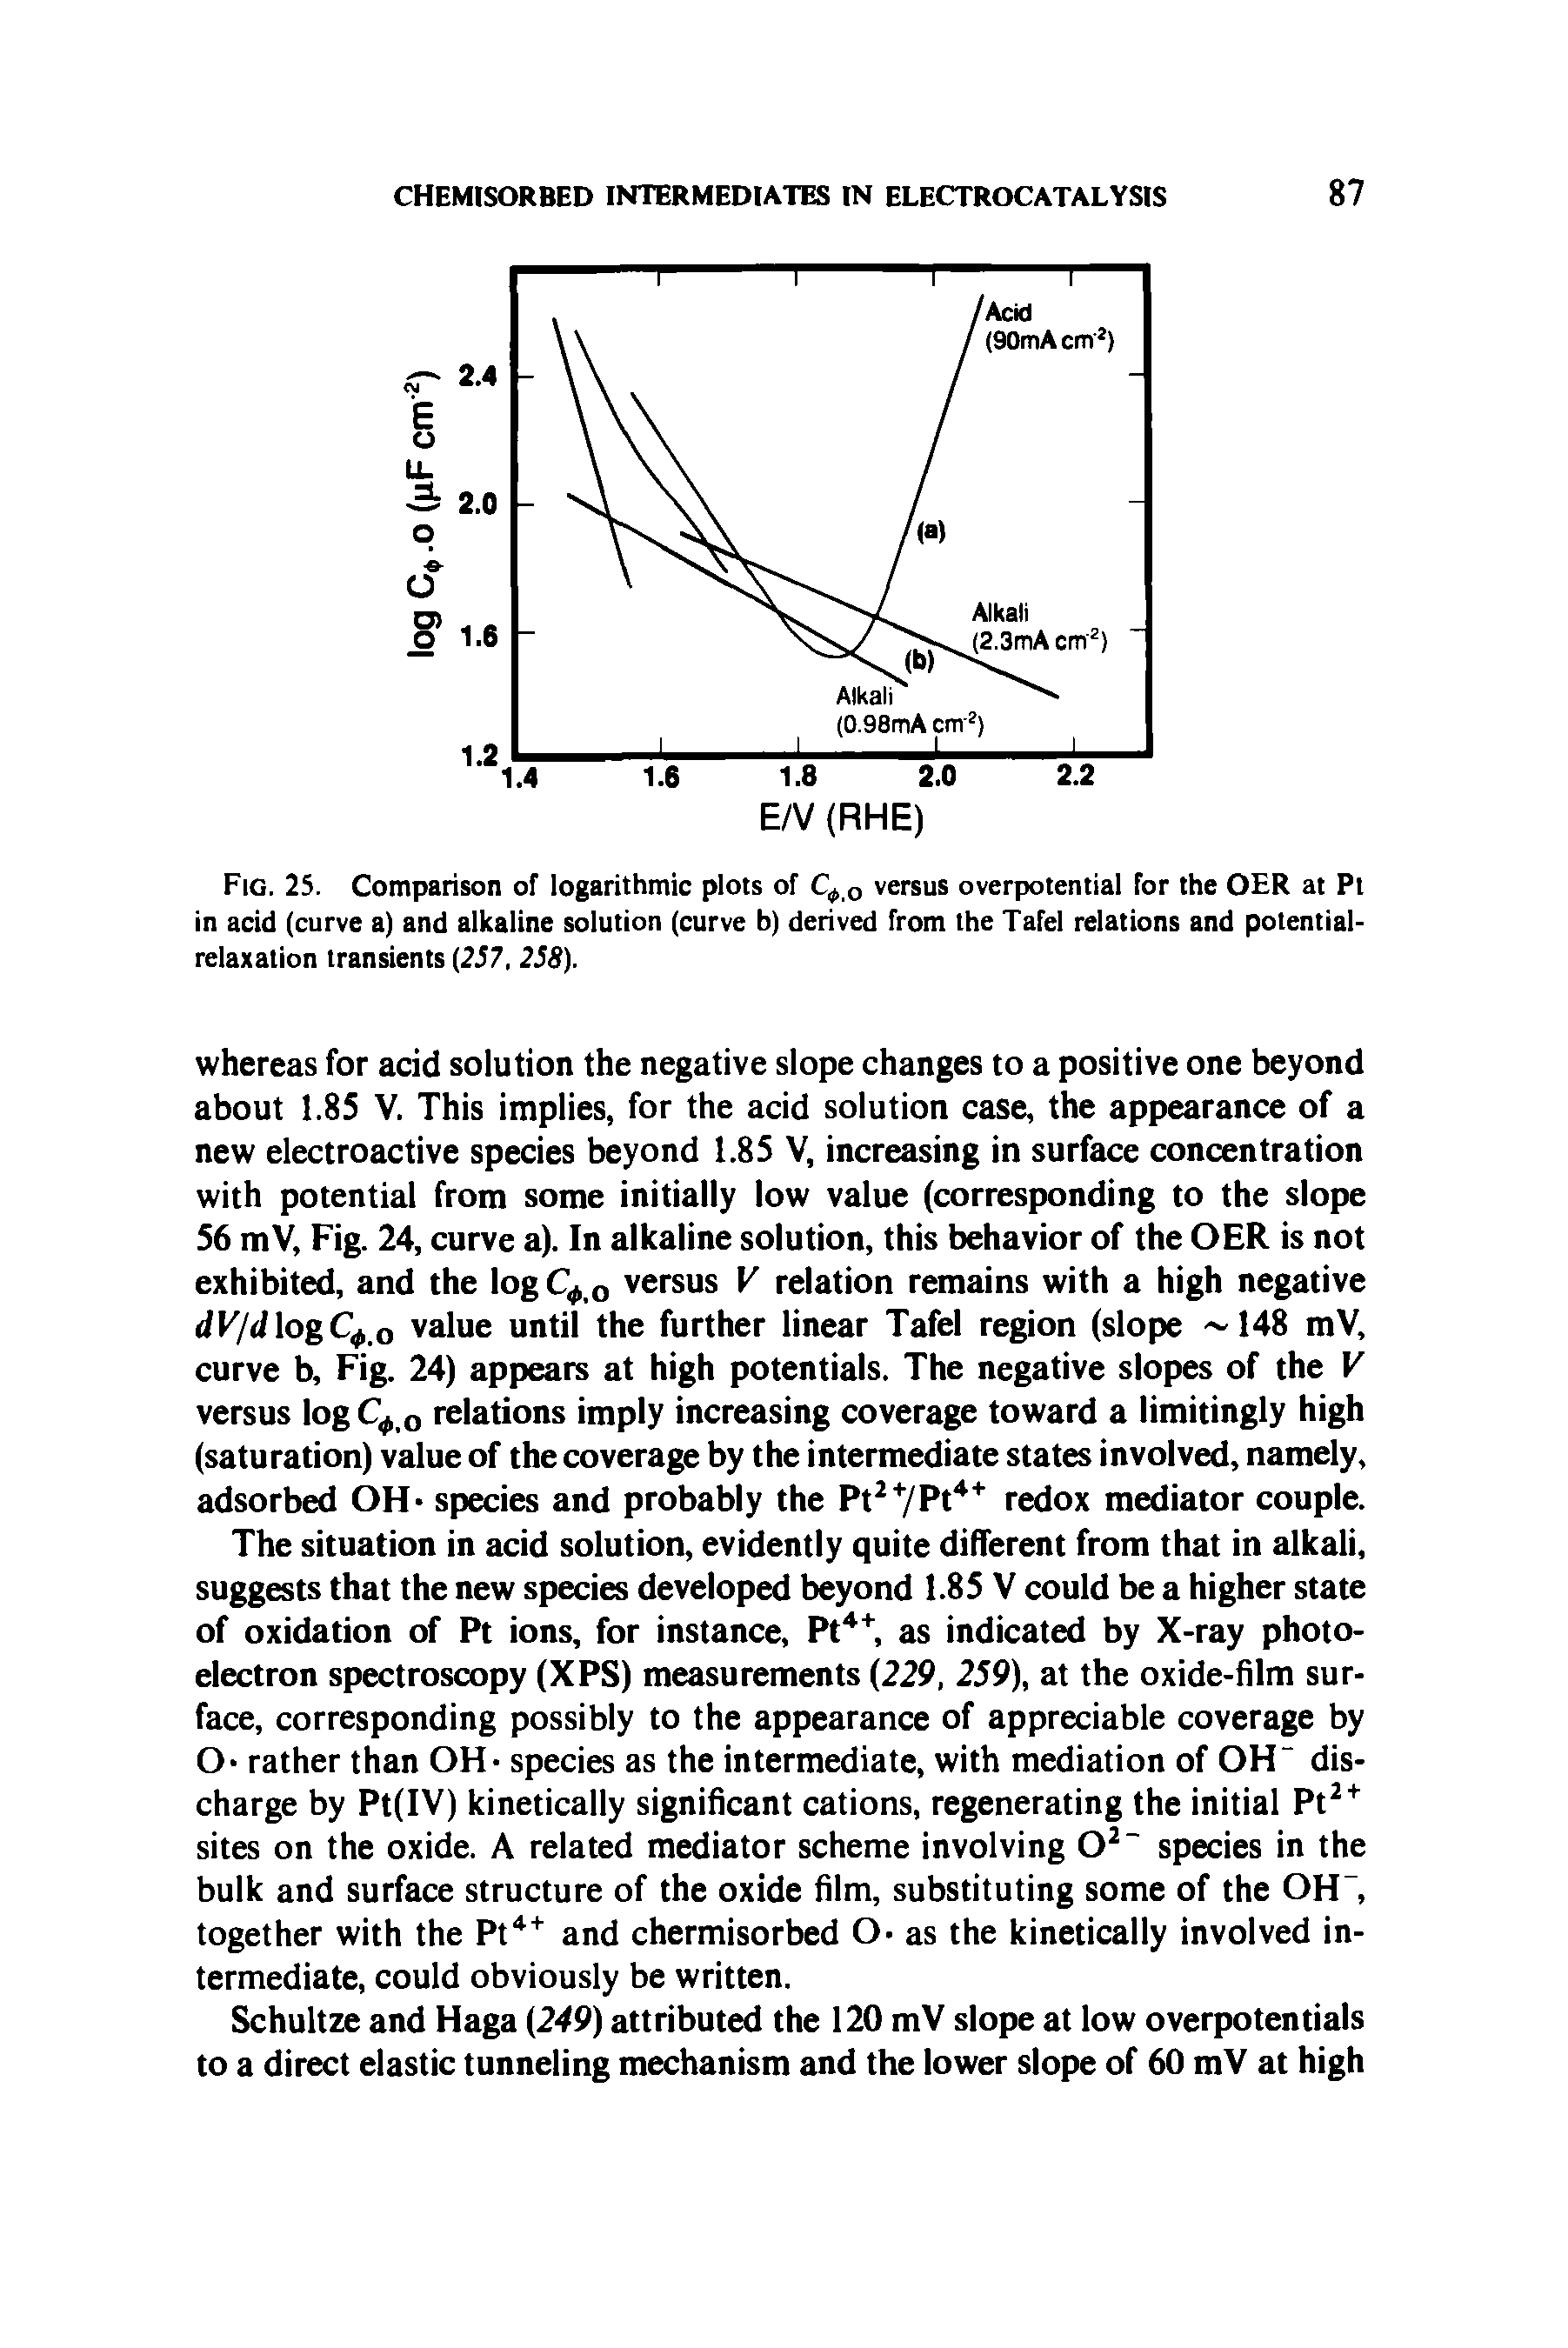 Fig. 25. Comparison of logarithmic plots of C o versus overpotential For the 0 R at Pt in acid (curve a) and alkaline solution (curve b) derived from the TaFel relations and potential-relaxation transients (257, 2S8).